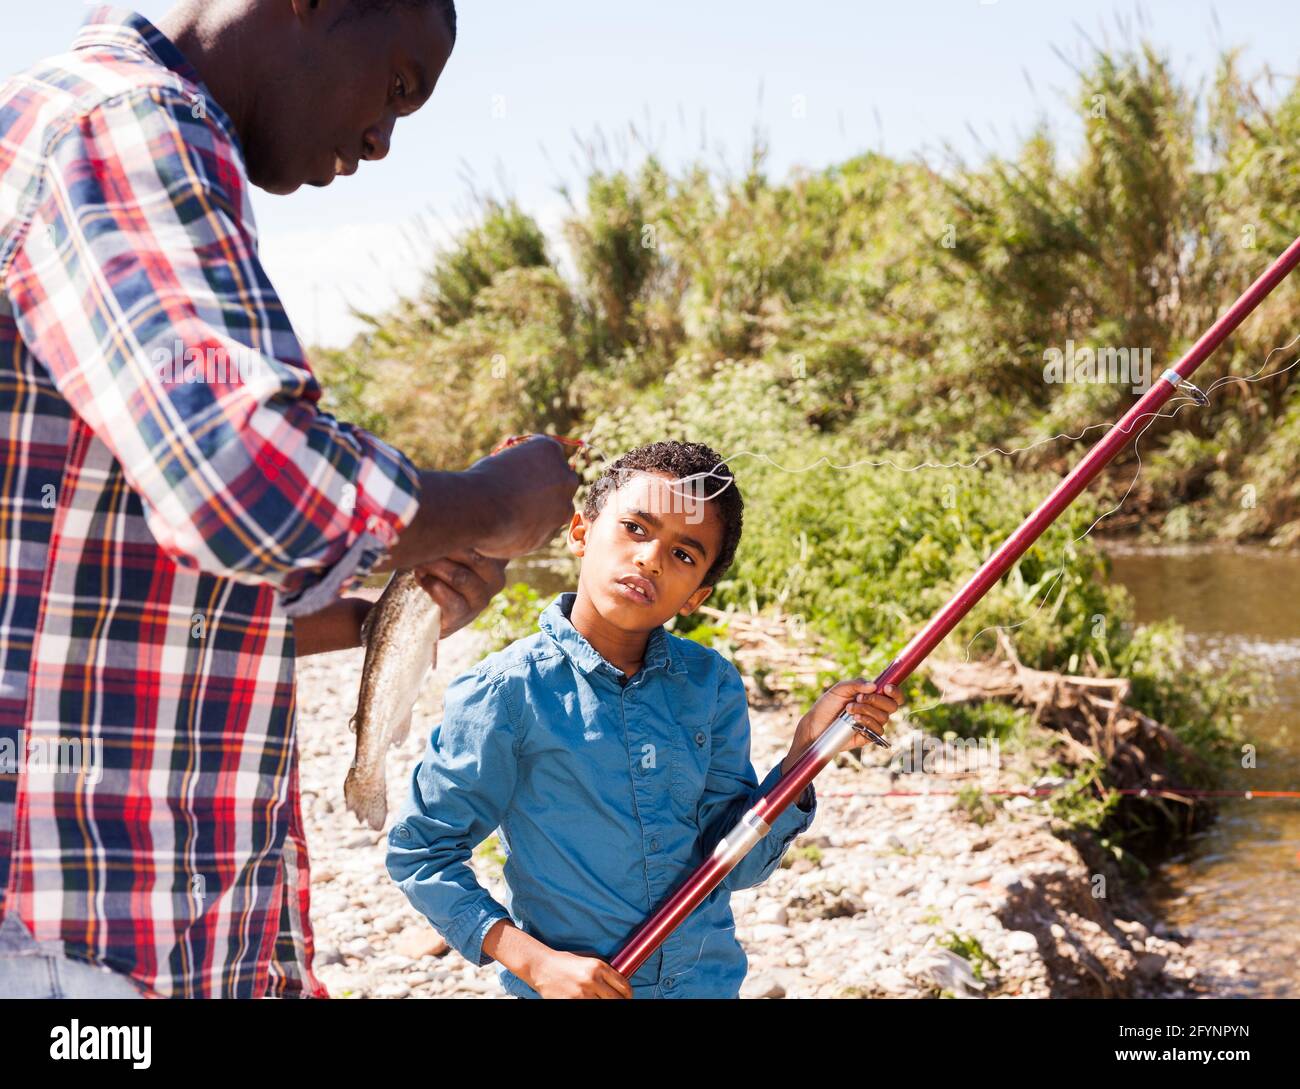 Portrait of enthusiastic little African boy and his father holding fishing rod with fish on hook Stock Photo